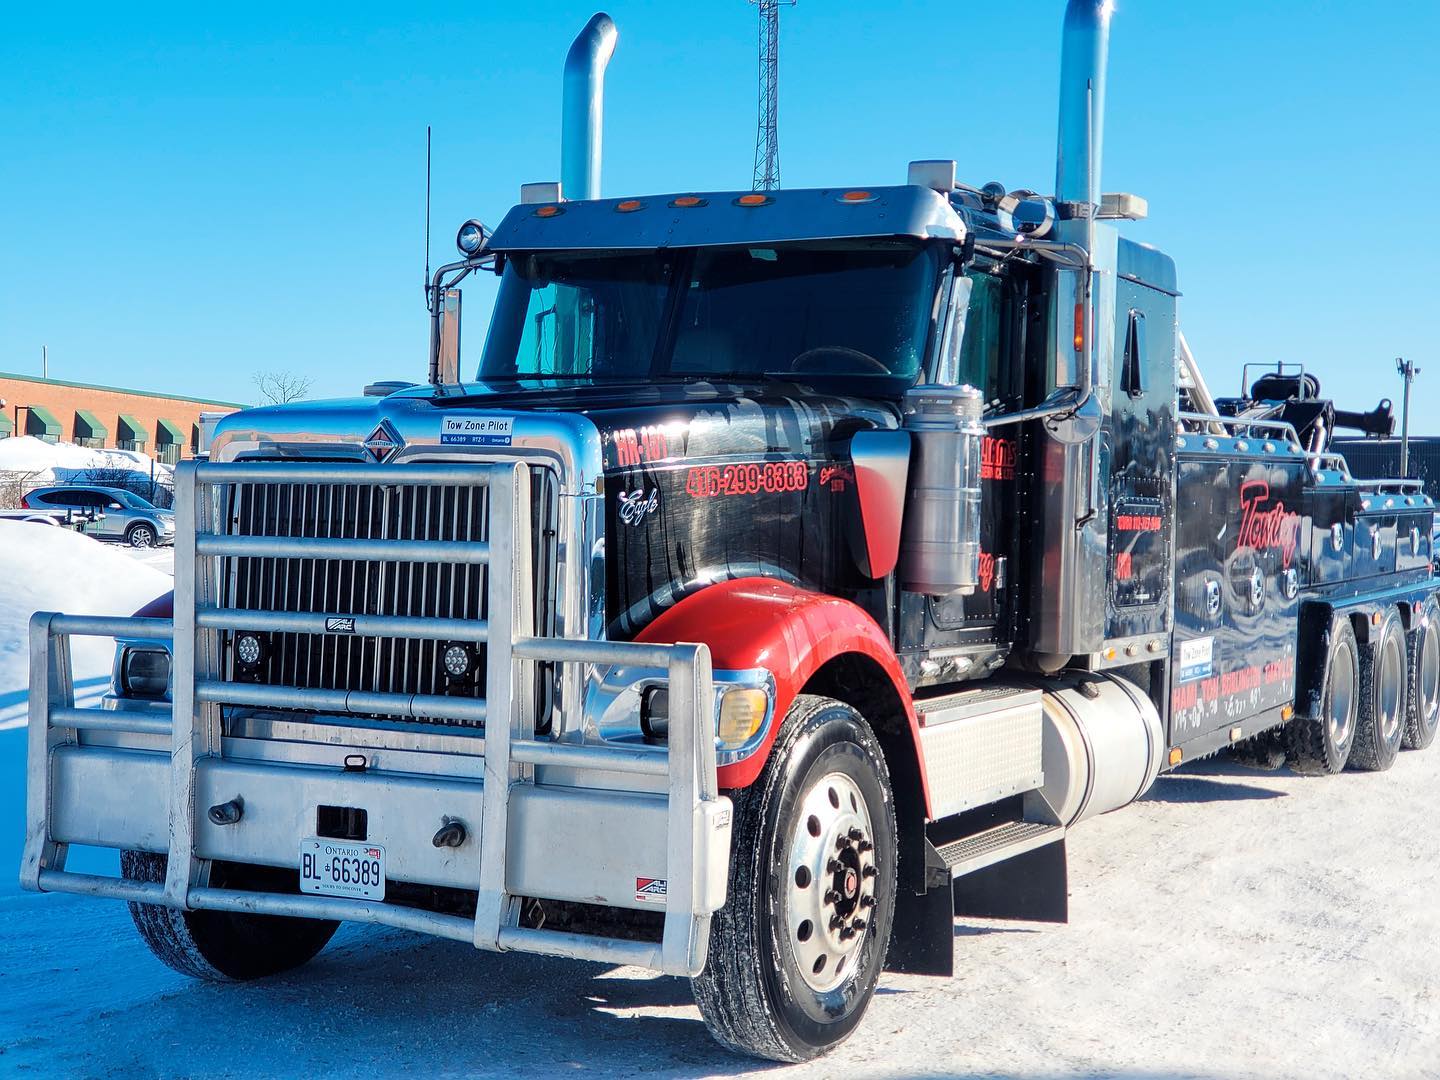 Williams Towing - Heavy Duty Towing Services in Toronto | Williams Towing